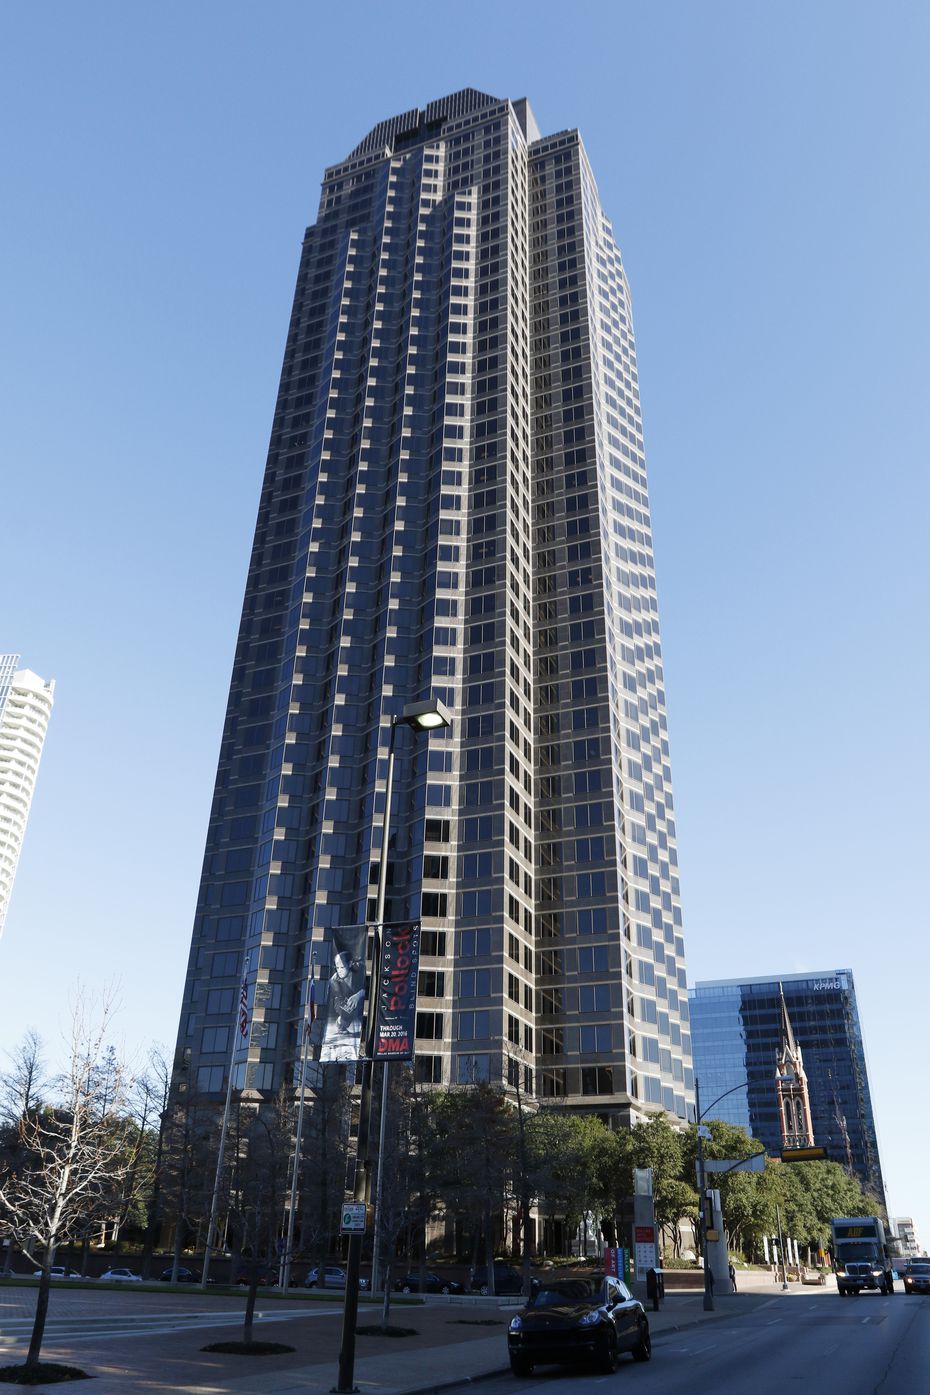 Trammell Crow Center is a 50-story postmodern skyscraper at 2001 Ross Avenue in the Arts...